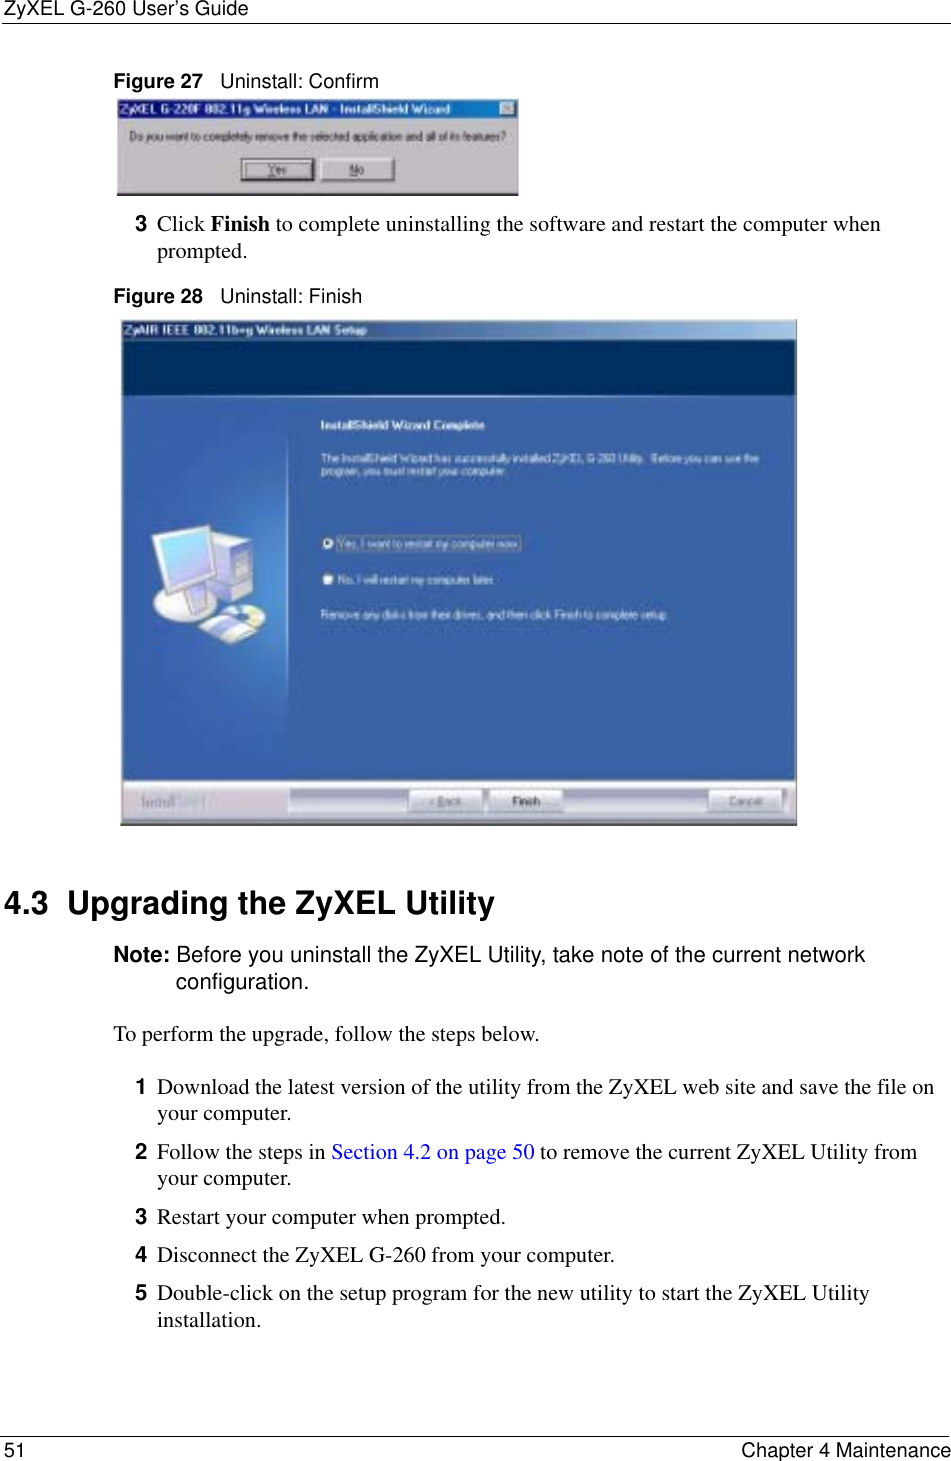 ZyXEL G-260 User’s Guide51 Chapter 4 MaintenanceFigure 27   Uninstall: Confirm  3Click Finish to complete uninstalling the software and restart the computer when prompted.Figure 28   Uninstall: Finish 4.3  Upgrading the ZyXEL Utility Note: Before you uninstall the ZyXEL Utility, take note of the current network configuration.To perform the upgrade, follow the steps below.1Download the latest version of the utility from the ZyXEL web site and save the file on your computer.2Follow the steps in Section 4.2 on page 50 to remove the current ZyXEL Utility from your computer.3Restart your computer when prompted.4Disconnect the ZyXEL G-260 from your computer.5Double-click on the setup program for the new utility to start the ZyXEL Utility installation.